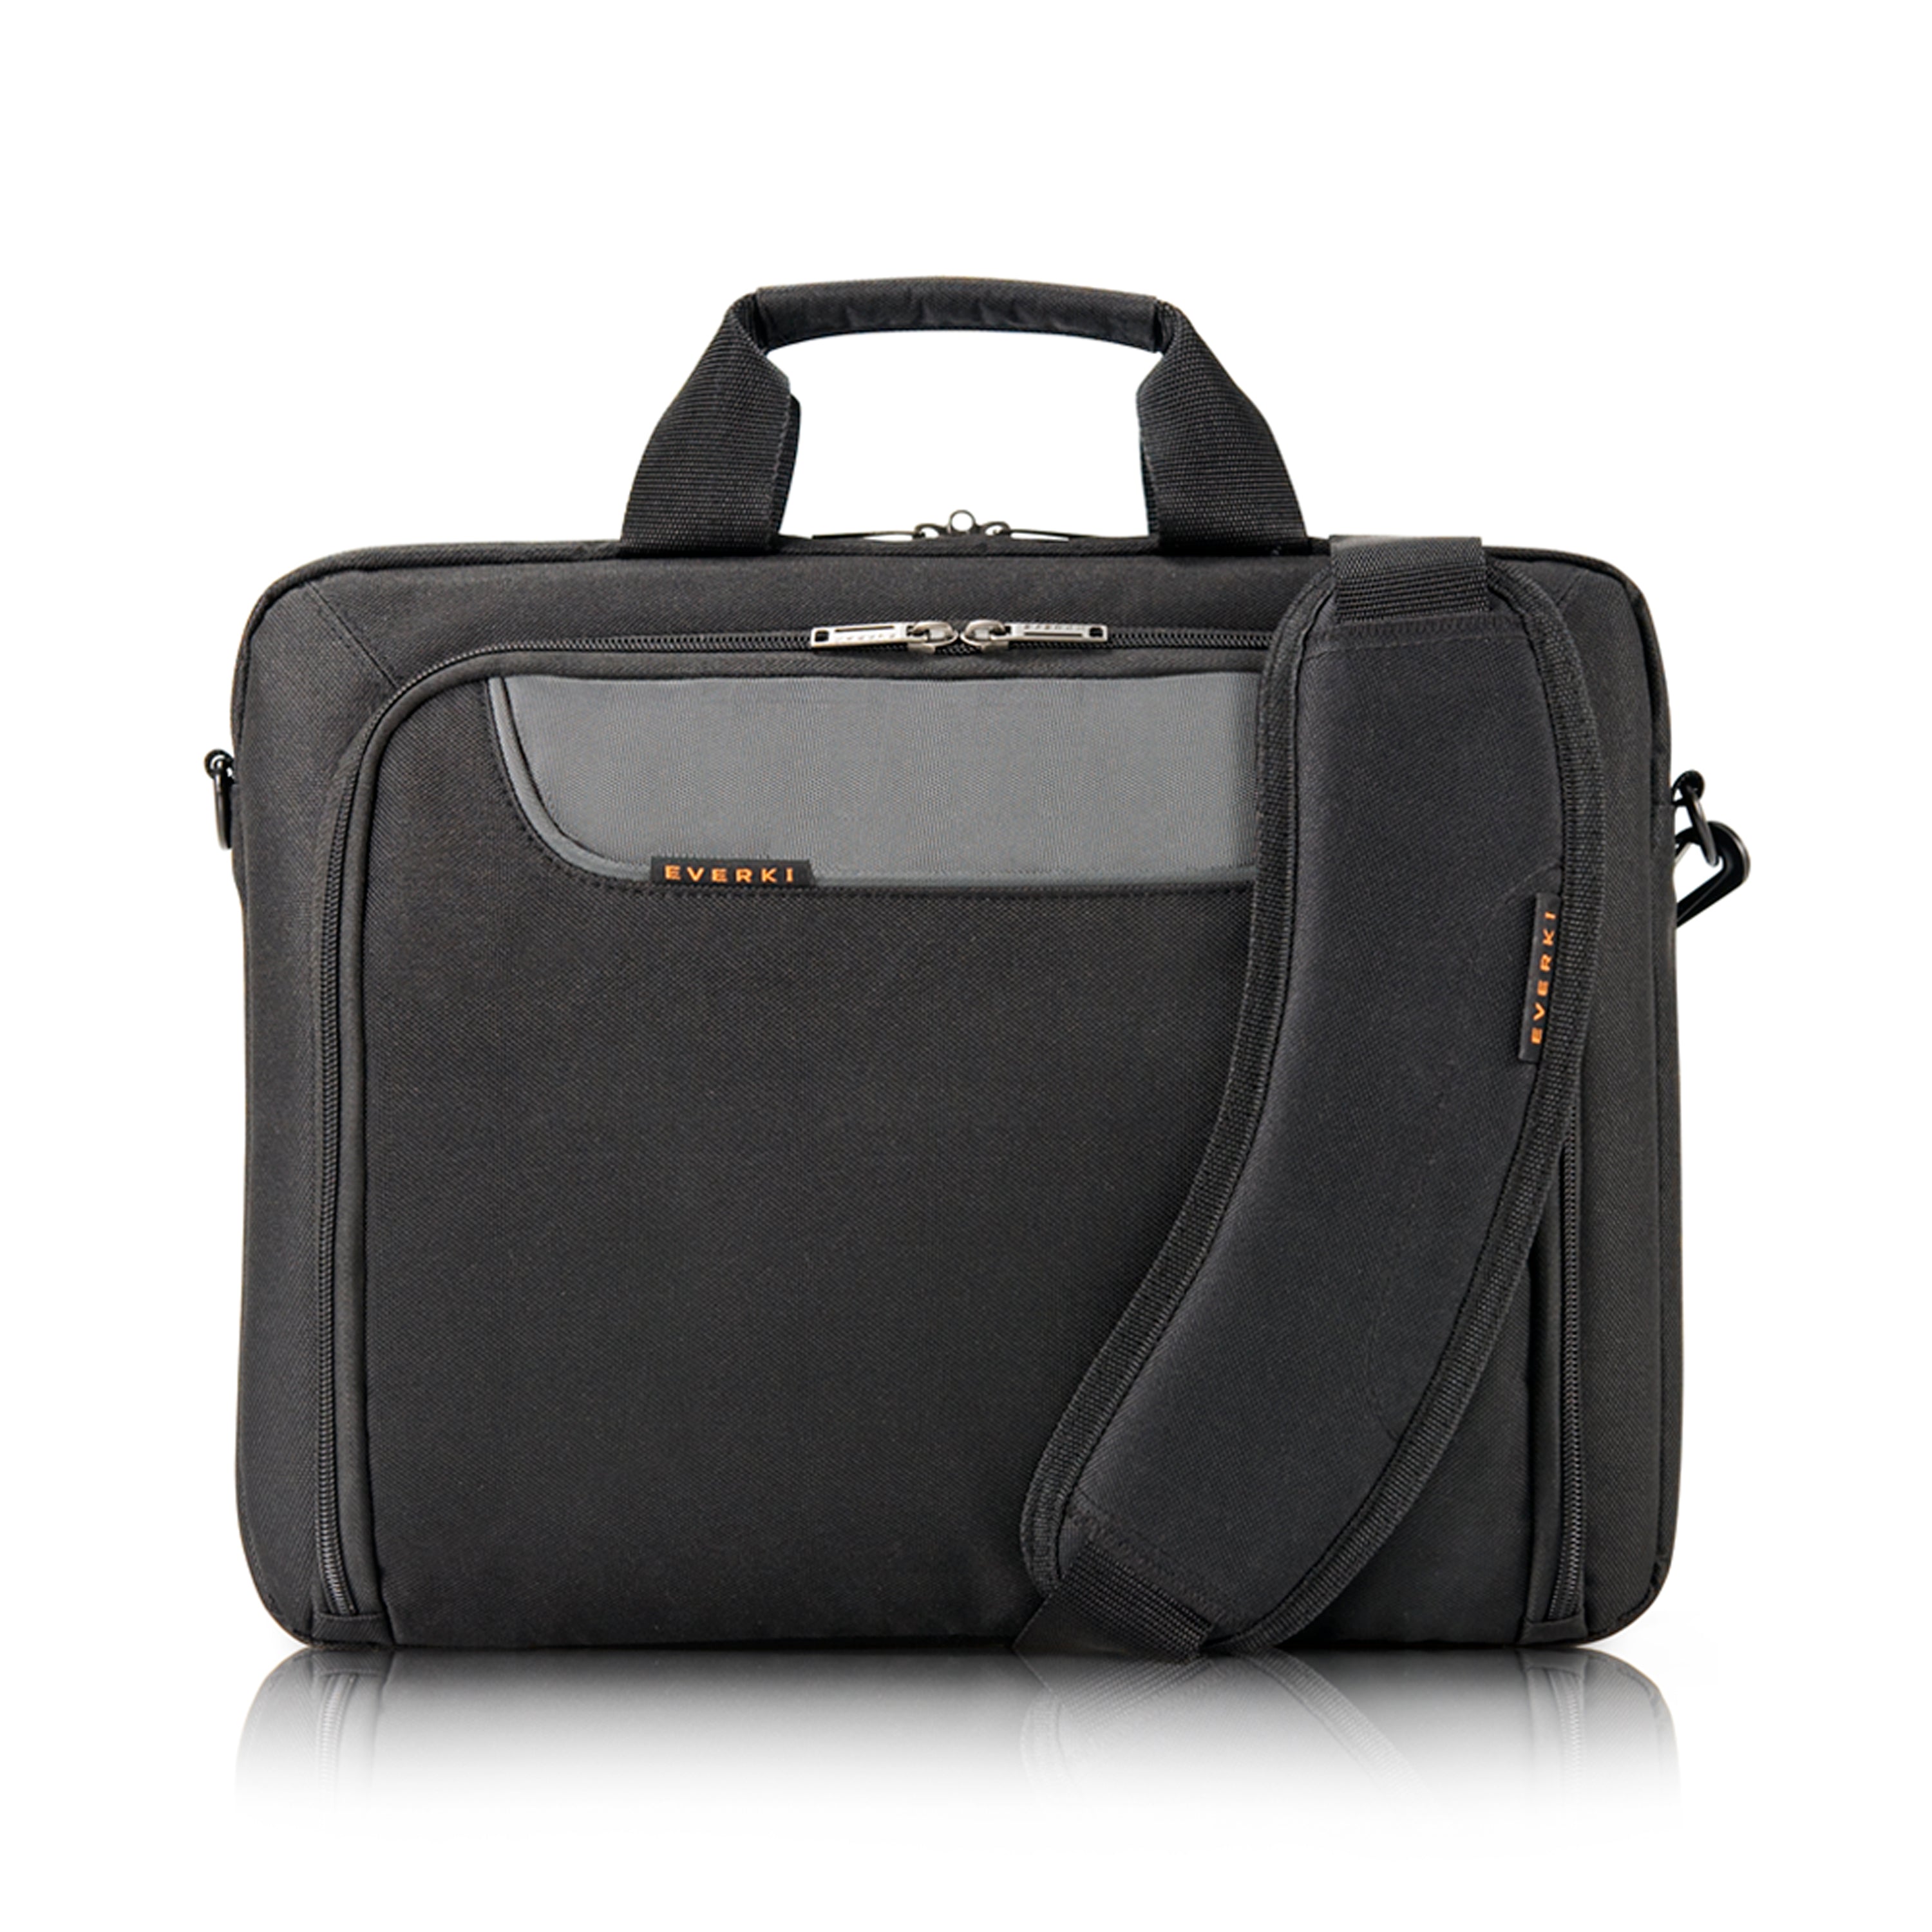 Case for computers and tablets up to 14 inches